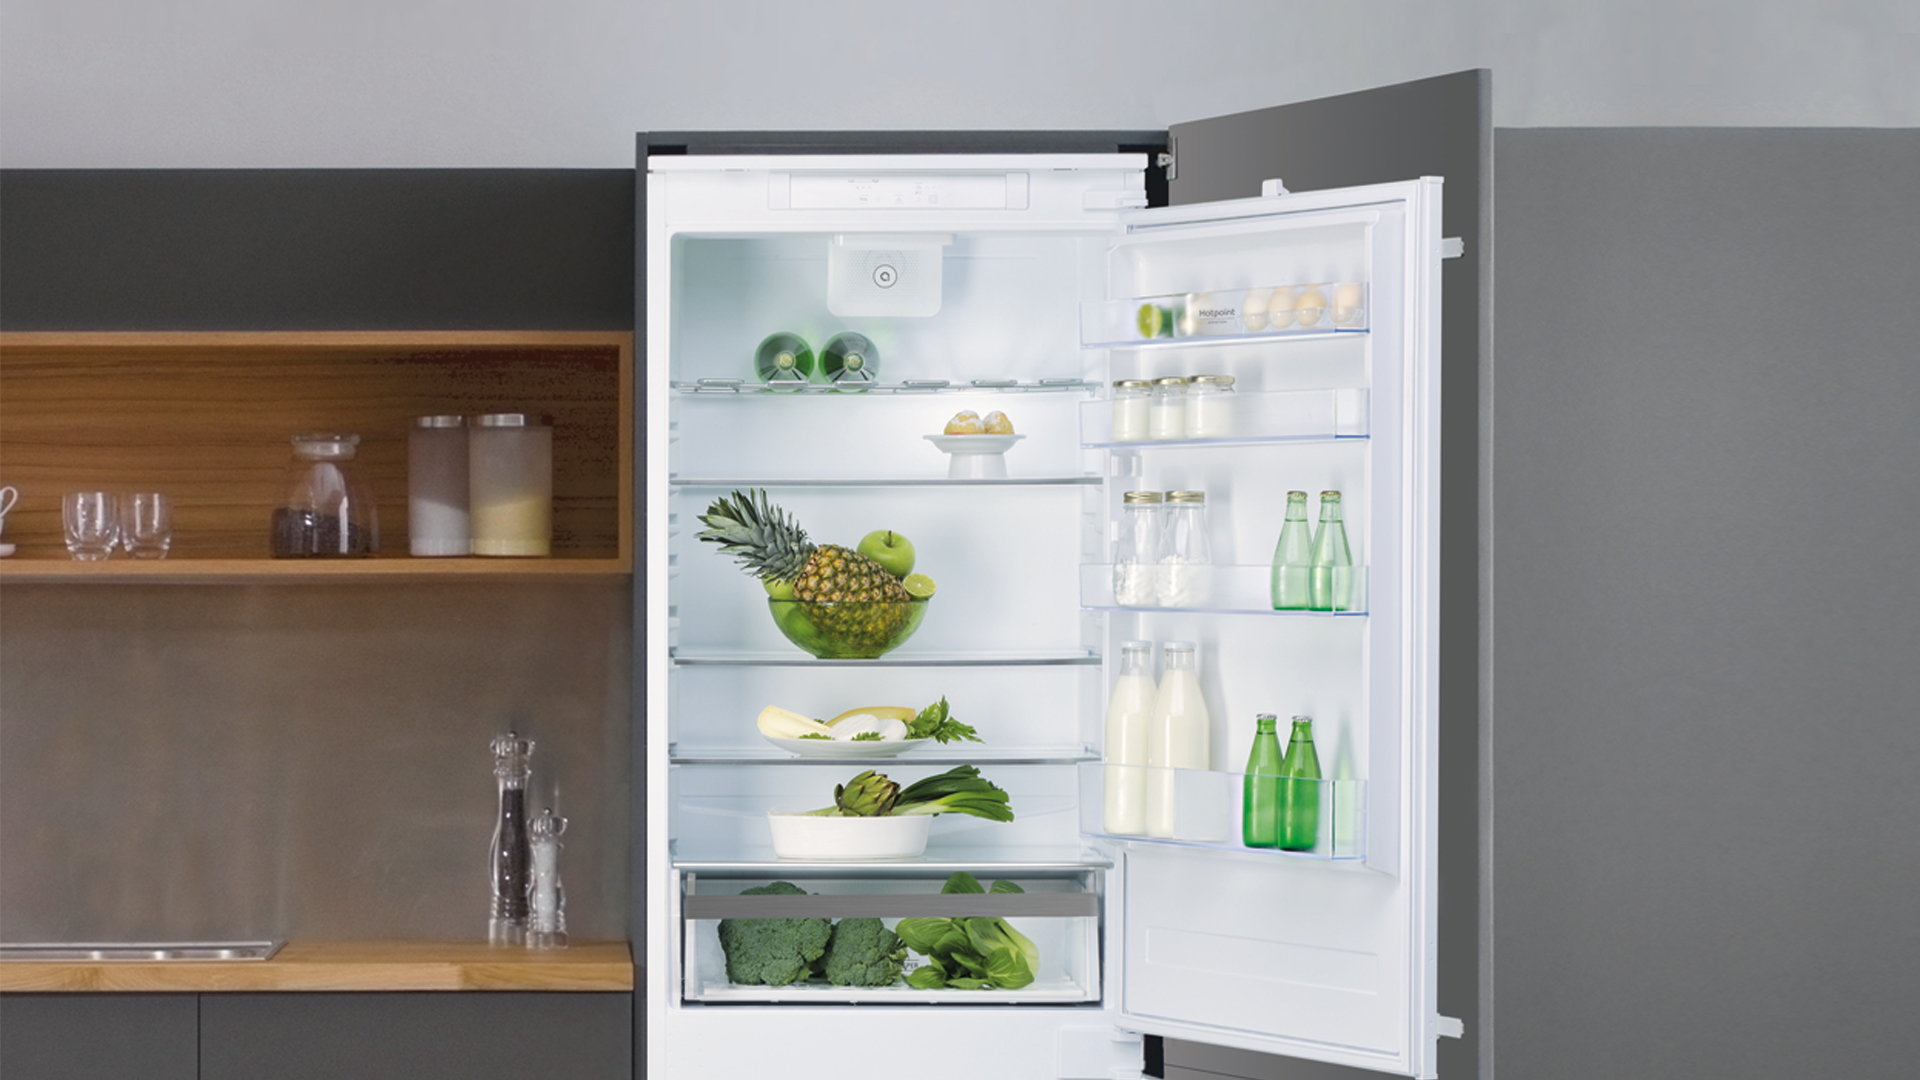 Extra space or freshness? You can have both with the Space 400 Hotpoint refrigerator